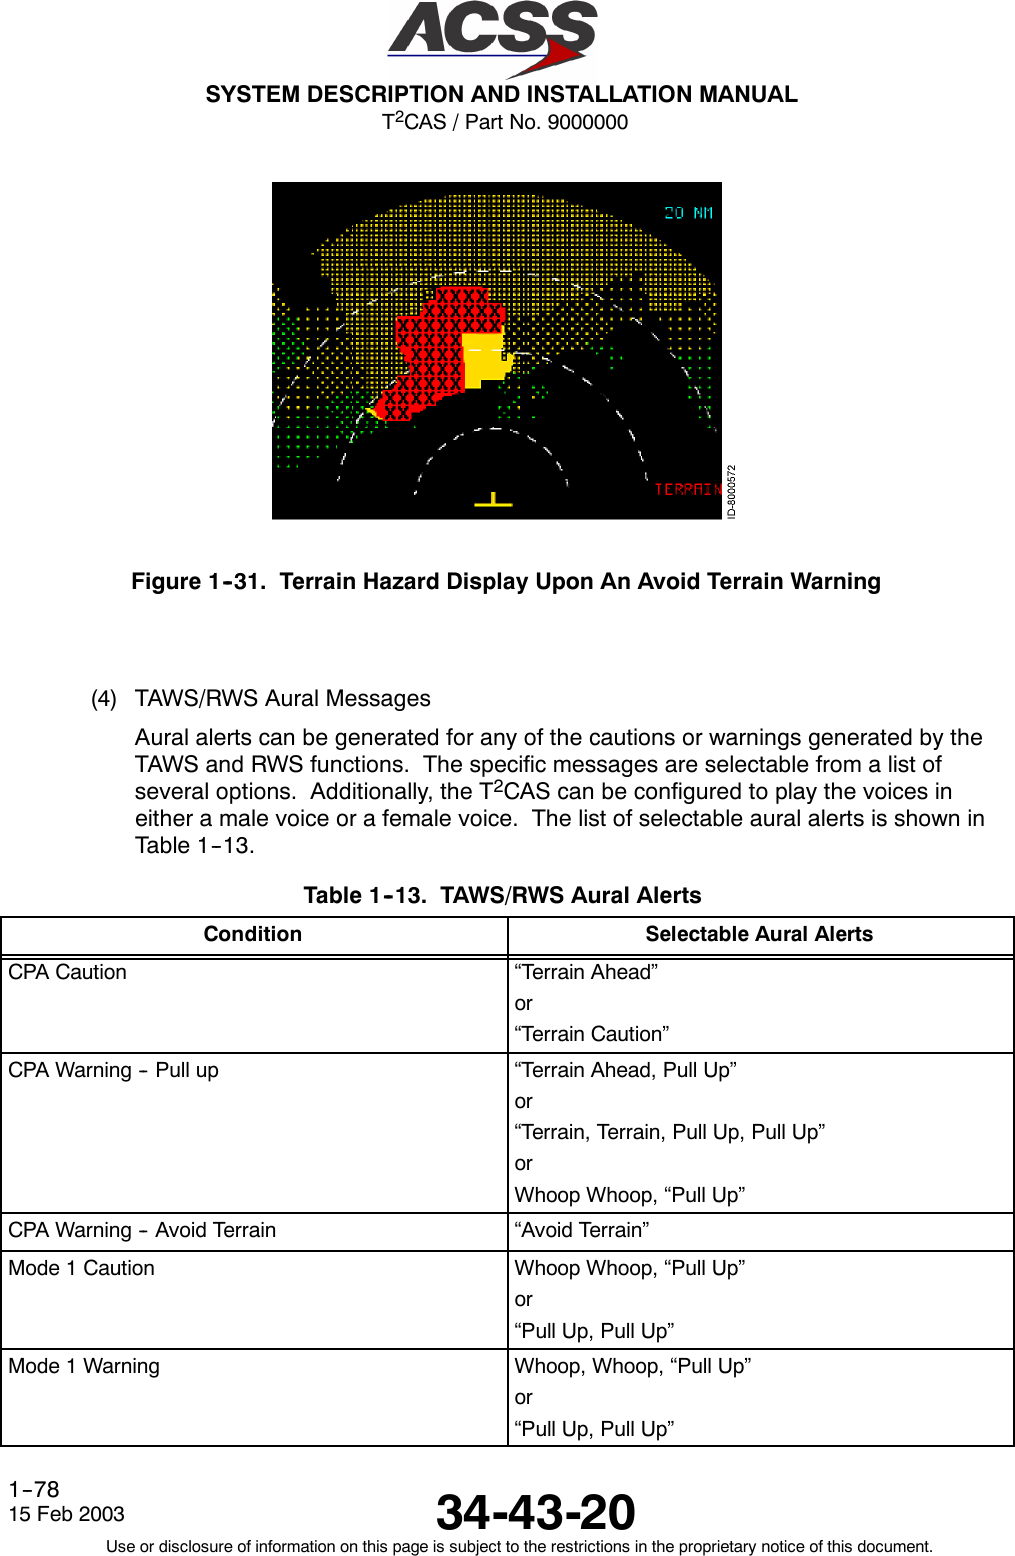 T2CAS / Part No. 9000000SYSTEM DESCRIPTION AND INSTALLATION MANUAL34-43-2015 Feb 2003Use or disclosure of information on this page is subject to the restrictions in the proprietary notice of this document.1--78Figure 1--31. Terrain Hazard Display Upon An Avoid Terrain Warning(4) TAWS/RWS Aural MessagesAural alerts can be generated for any of the cautions or warnings generated by theTAWS and RWS functions. The specific messages are selectable from a list ofseveral options. Additionally, the T2CAS can be configured to play the voices ineither a male voice or a female voice. The list of selectable aural alerts is shown inTable 1--13.Table 1 -- 13. TAWS/RWS Aural AlertsCondition Selectable Aural AlertsCPA Caution “Terrain Ahead”or“Terrain Caution”CPA Warning -- Pull up “Terrain Ahead, Pull Up”or“Terrain, Terrain, Pull Up, Pull Up”orWhoop Whoop, “Pull Up”CPA Warning -- Avoid Terrain “Avoid Terrain”Mode 1 Caution Whoop Whoop, “Pull Up”or“Pull Up, Pull Up”Mode 1 Warning Whoop, Whoop, “Pull Up”or“Pull Up, Pull Up”